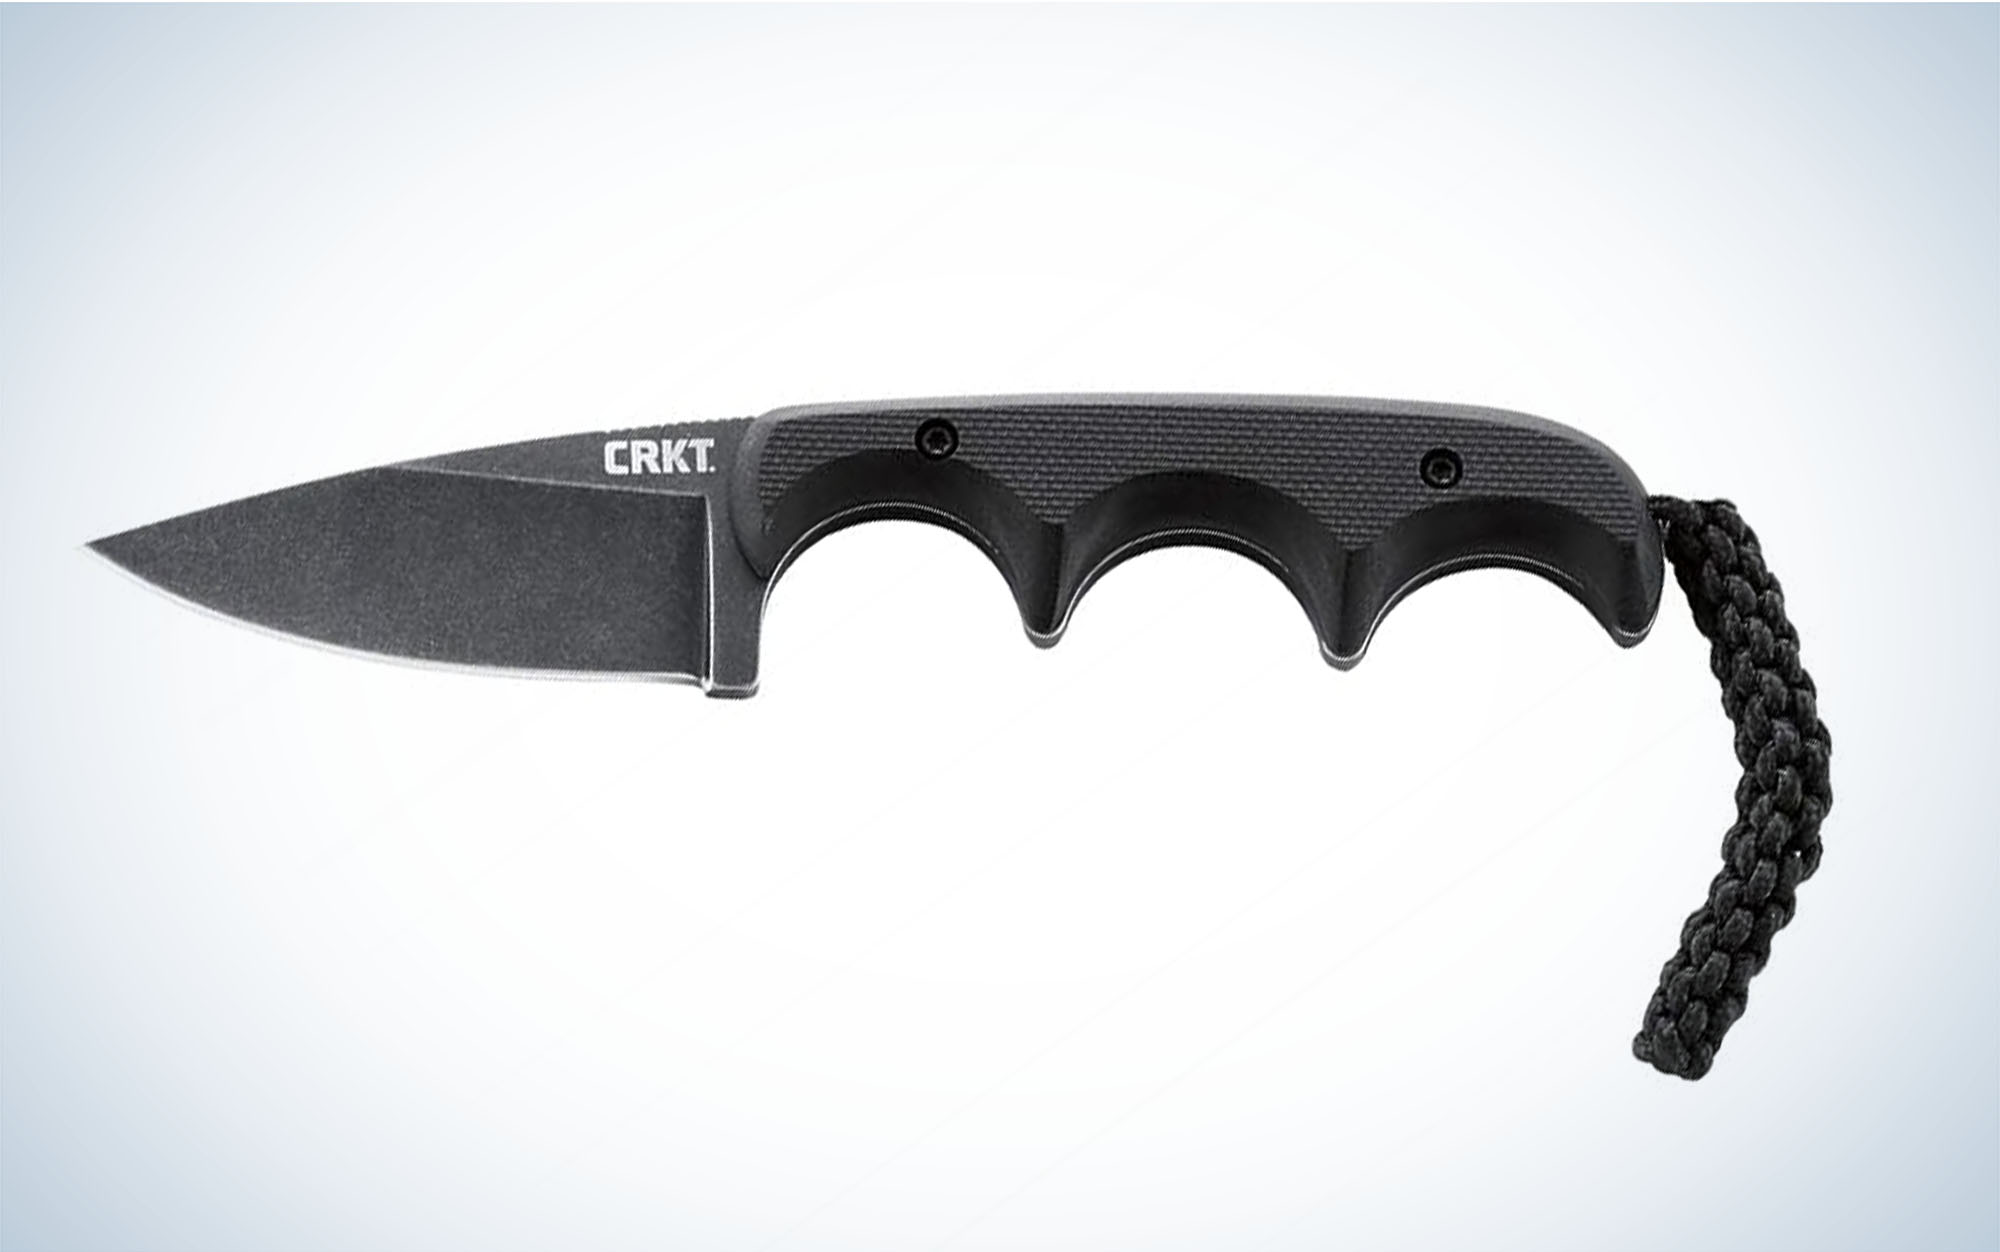 We tested the CRKT Minimalist Drop Point.